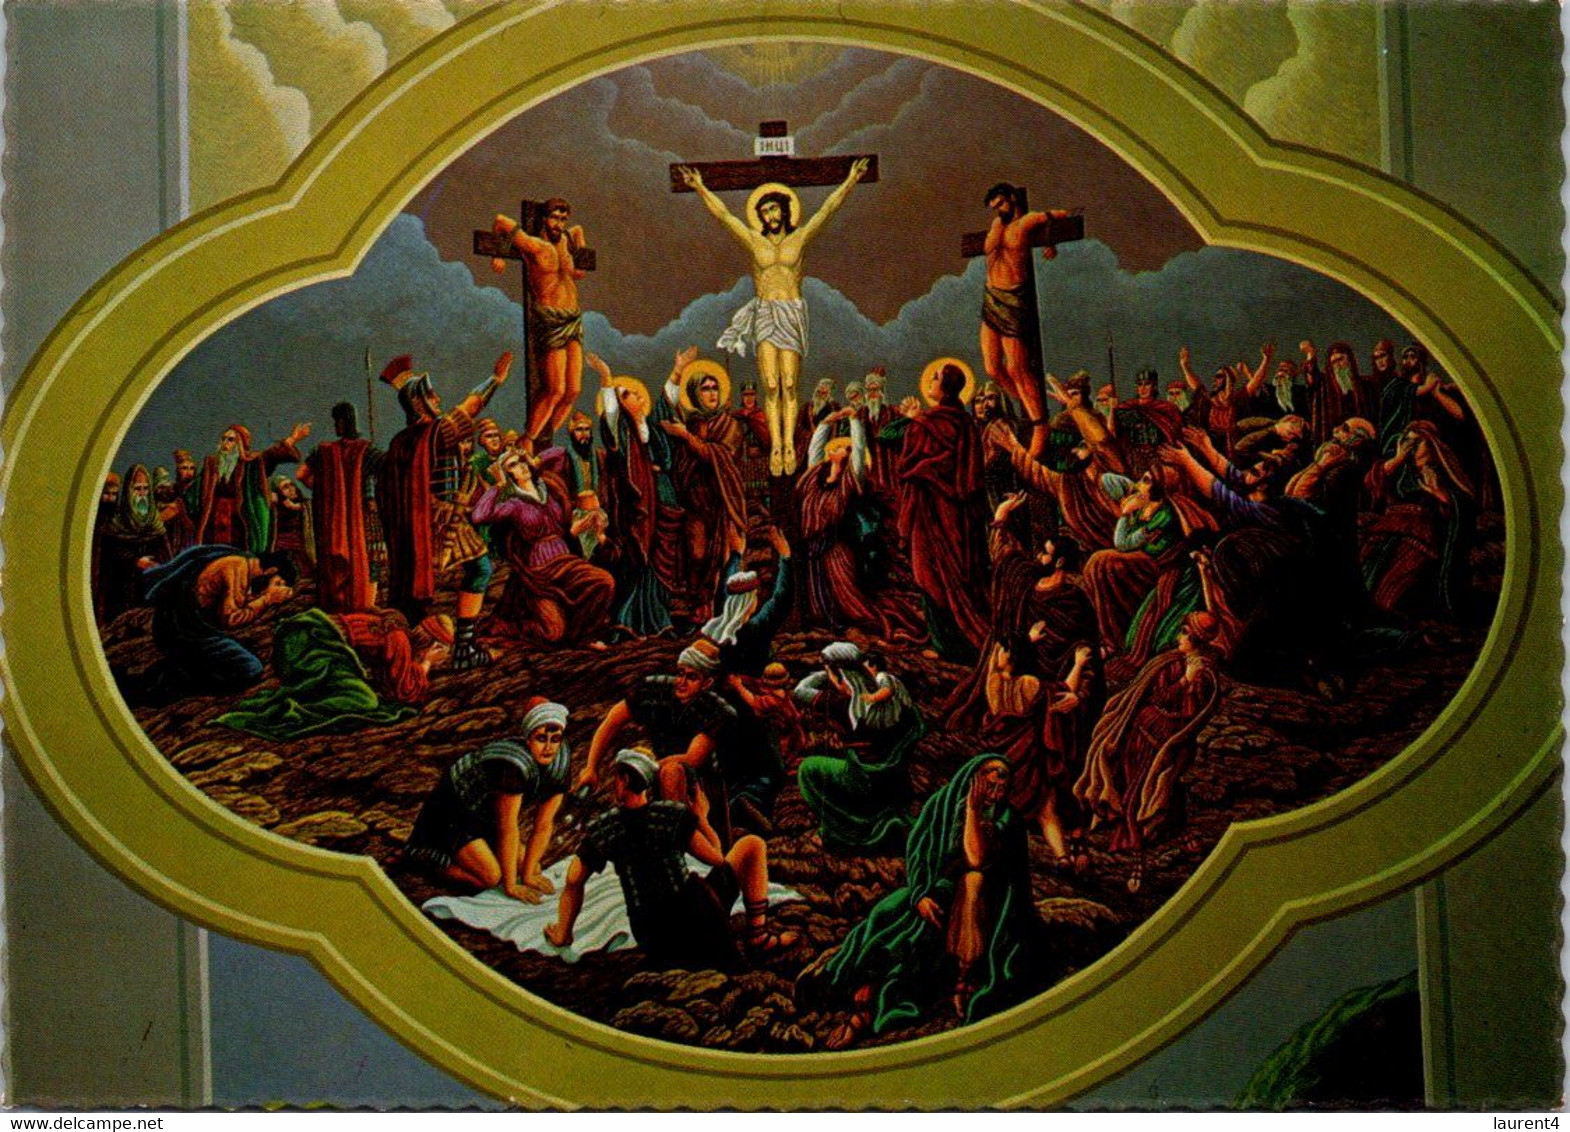 (2 N 10) Australia - ACT - Canberra (Serbian Church Painting) - Canberra (ACT)